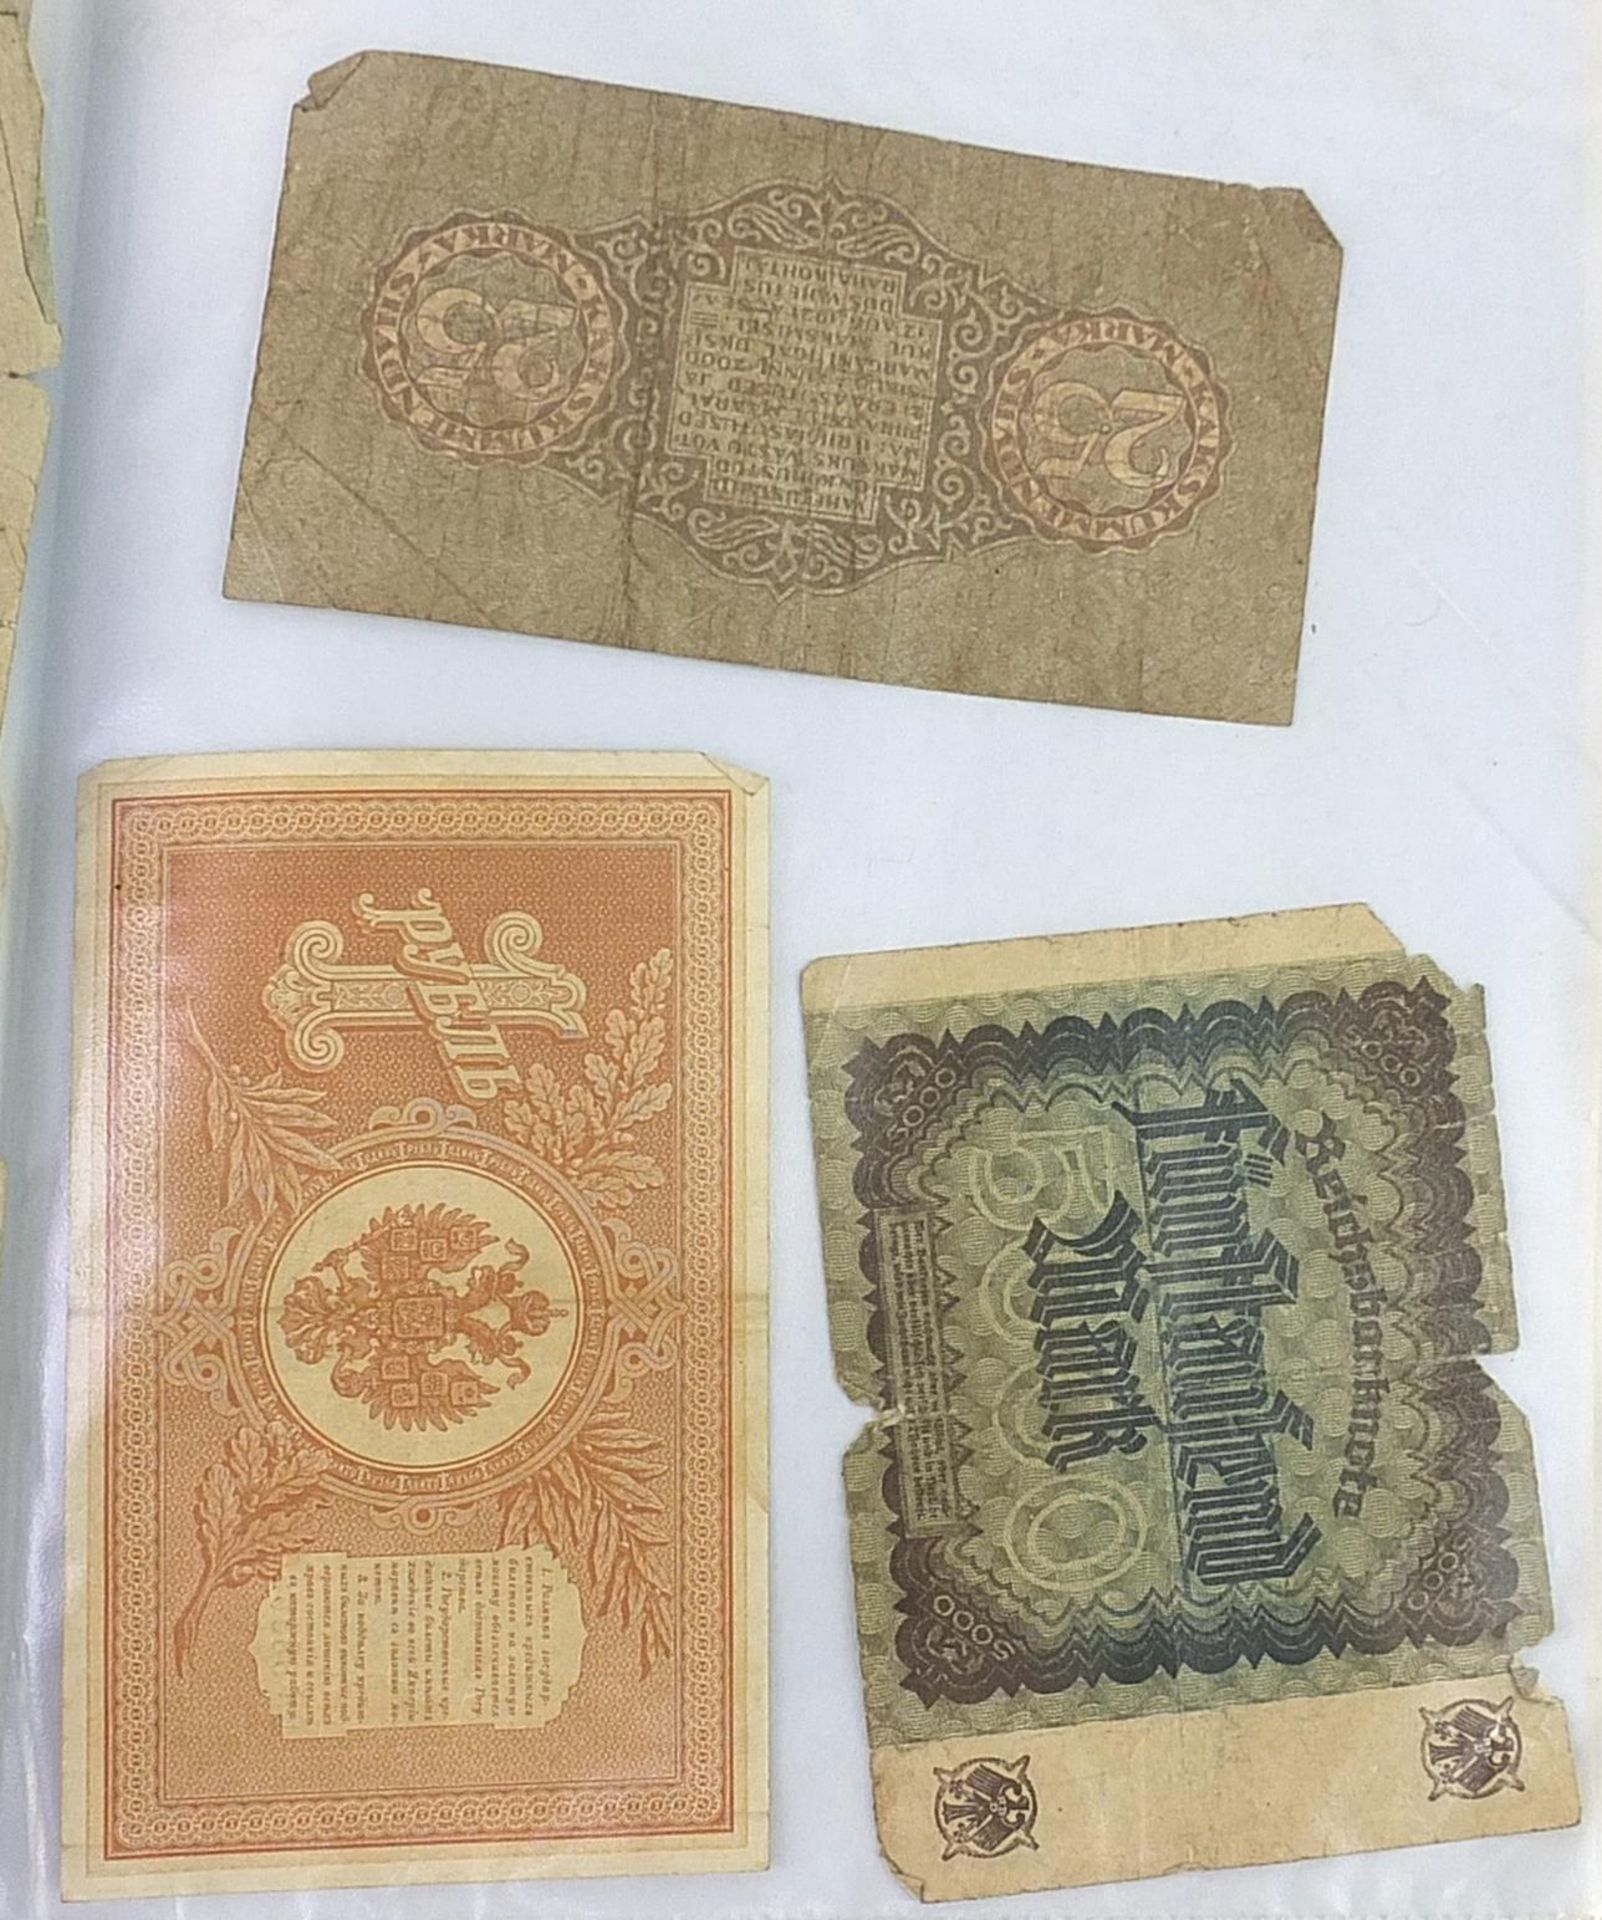 World banknotes including German and Russian examples - Image 15 of 16